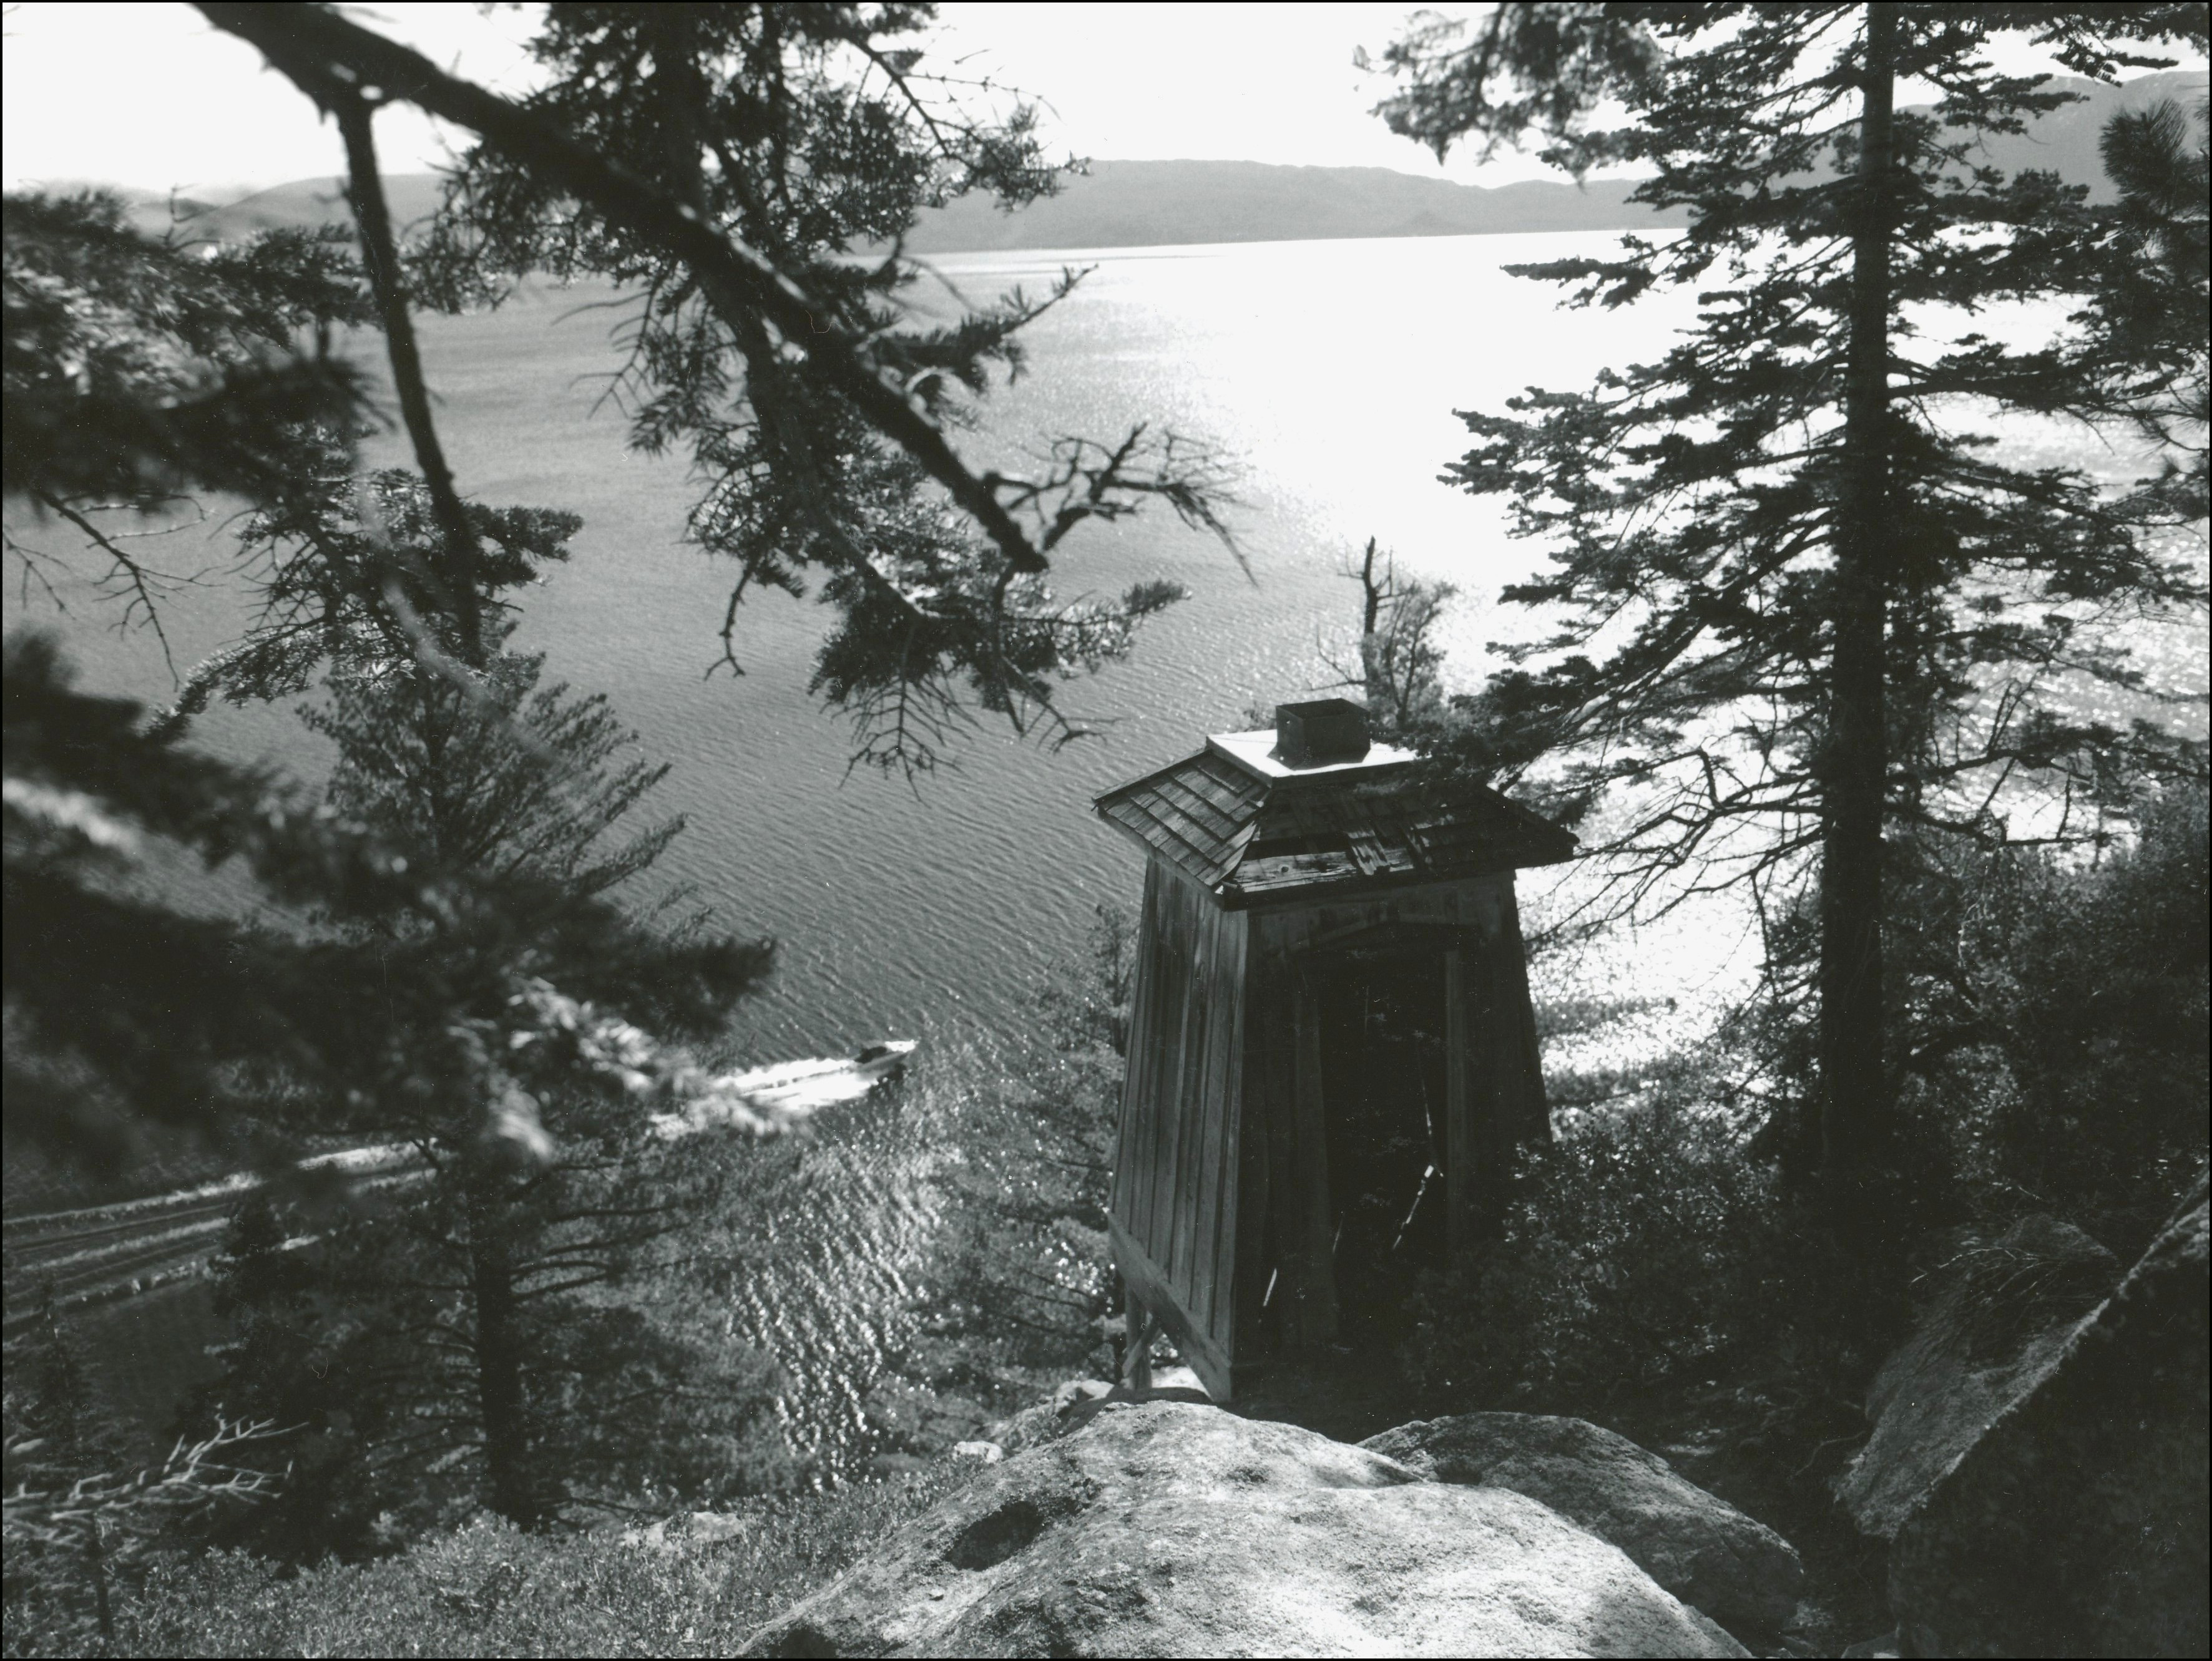 View of lake through the trees on the shore. Closer to the lake up on rock ledge is an old lighthouse and down below on the lake is a motor boat